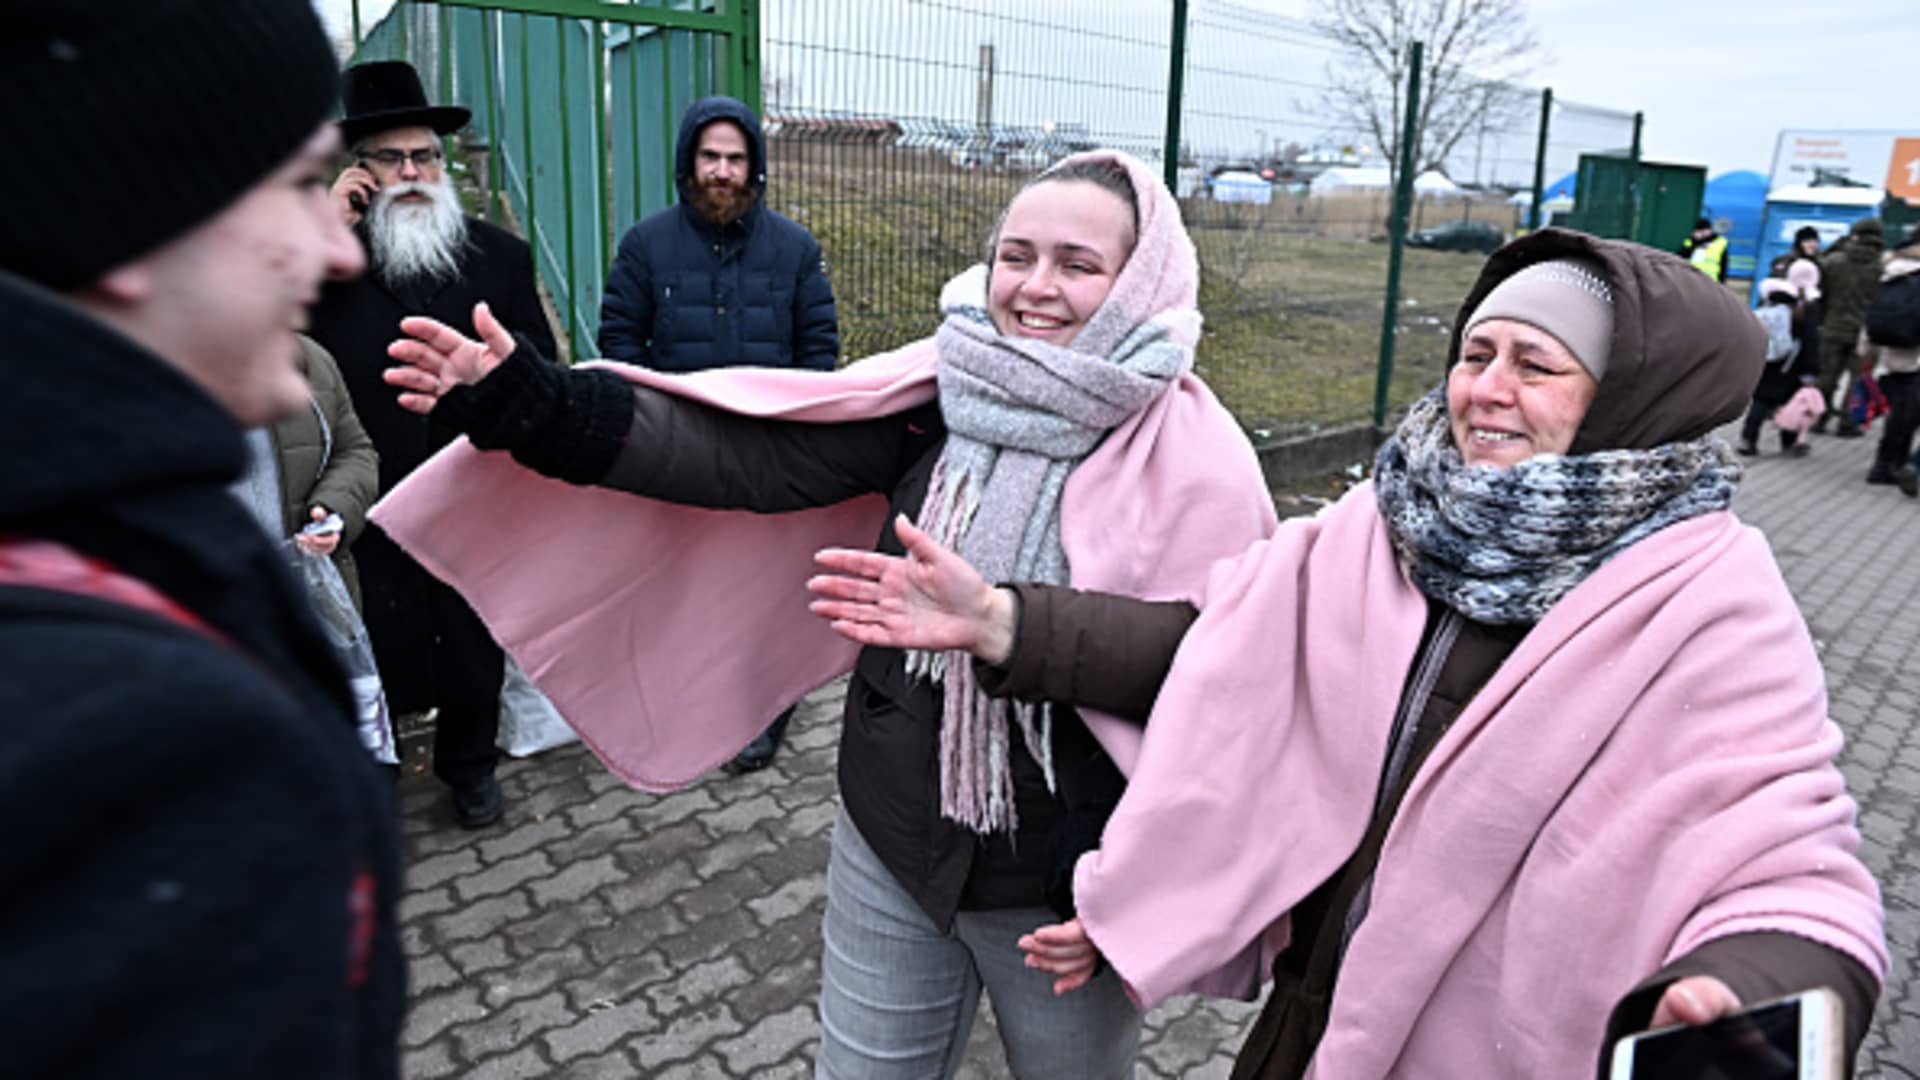 Ukrainian refugee Orest Hromnadzkiy gets a hug from his sister Yuliia and mother Alla after he crossed the border in Medyka, Poland, March 9, 2022.